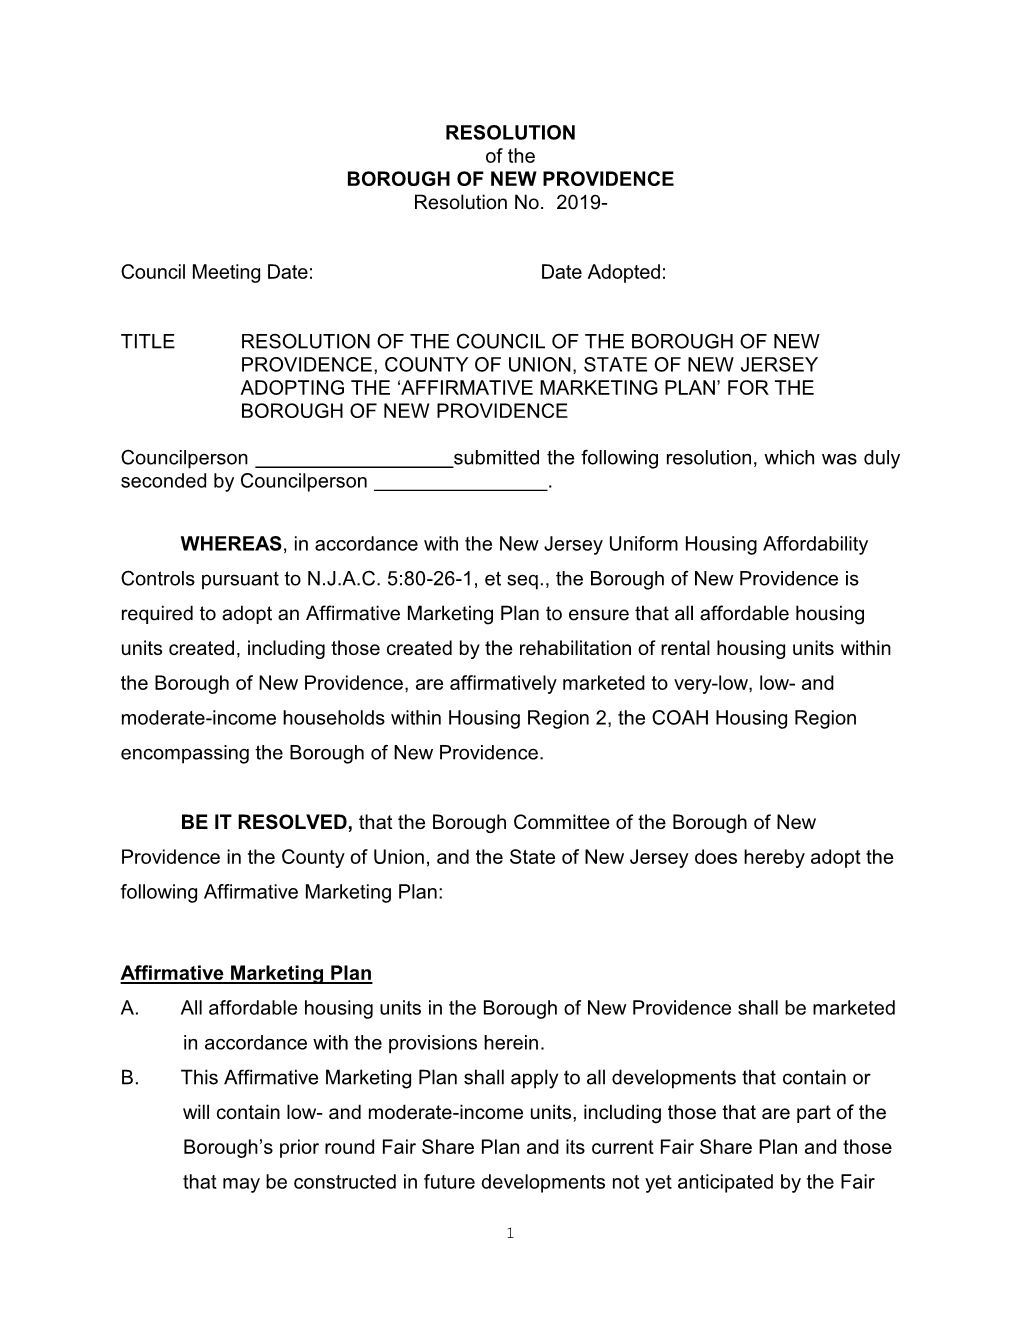 RESOLUTION of the BOROUGH of NEW PROVIDENCE Resolution No DocsLib